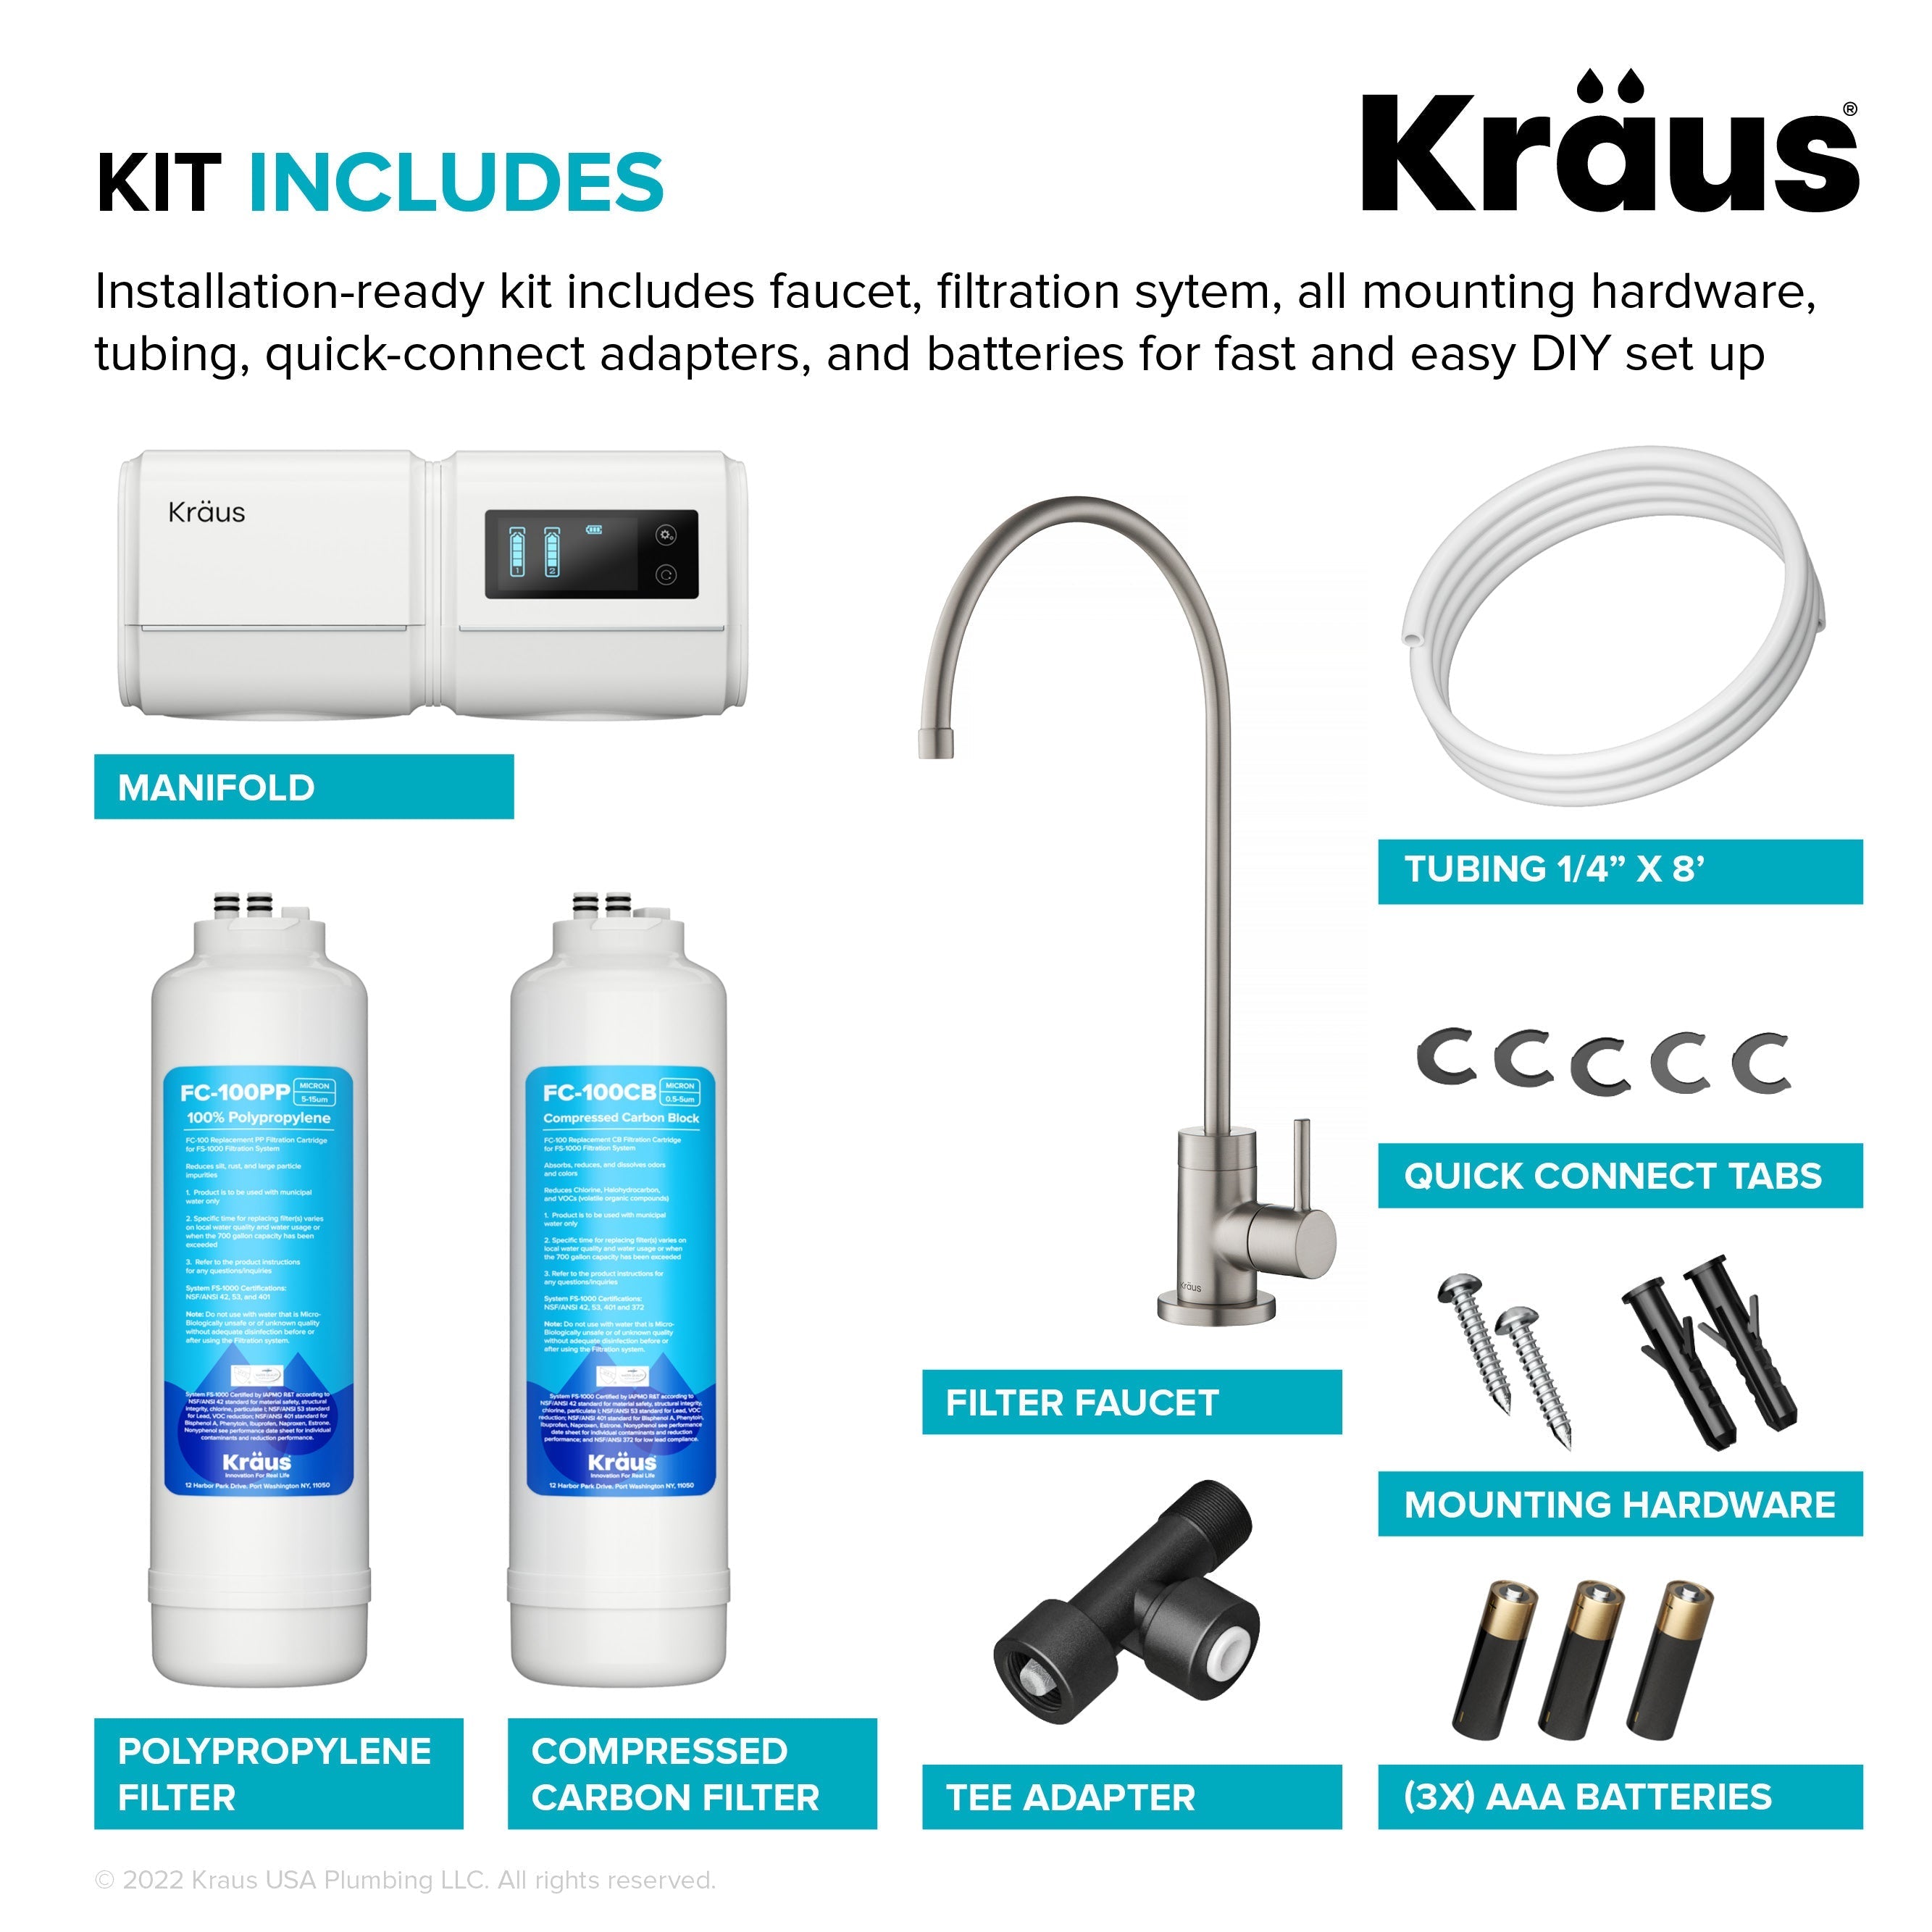 KRAUS Purita 2-Stage Under-Sink Filtration System with Single Handle Drinking Water Filter Faucet in Spot-Free Stainless Steel-FS-1000-FF-100SFS